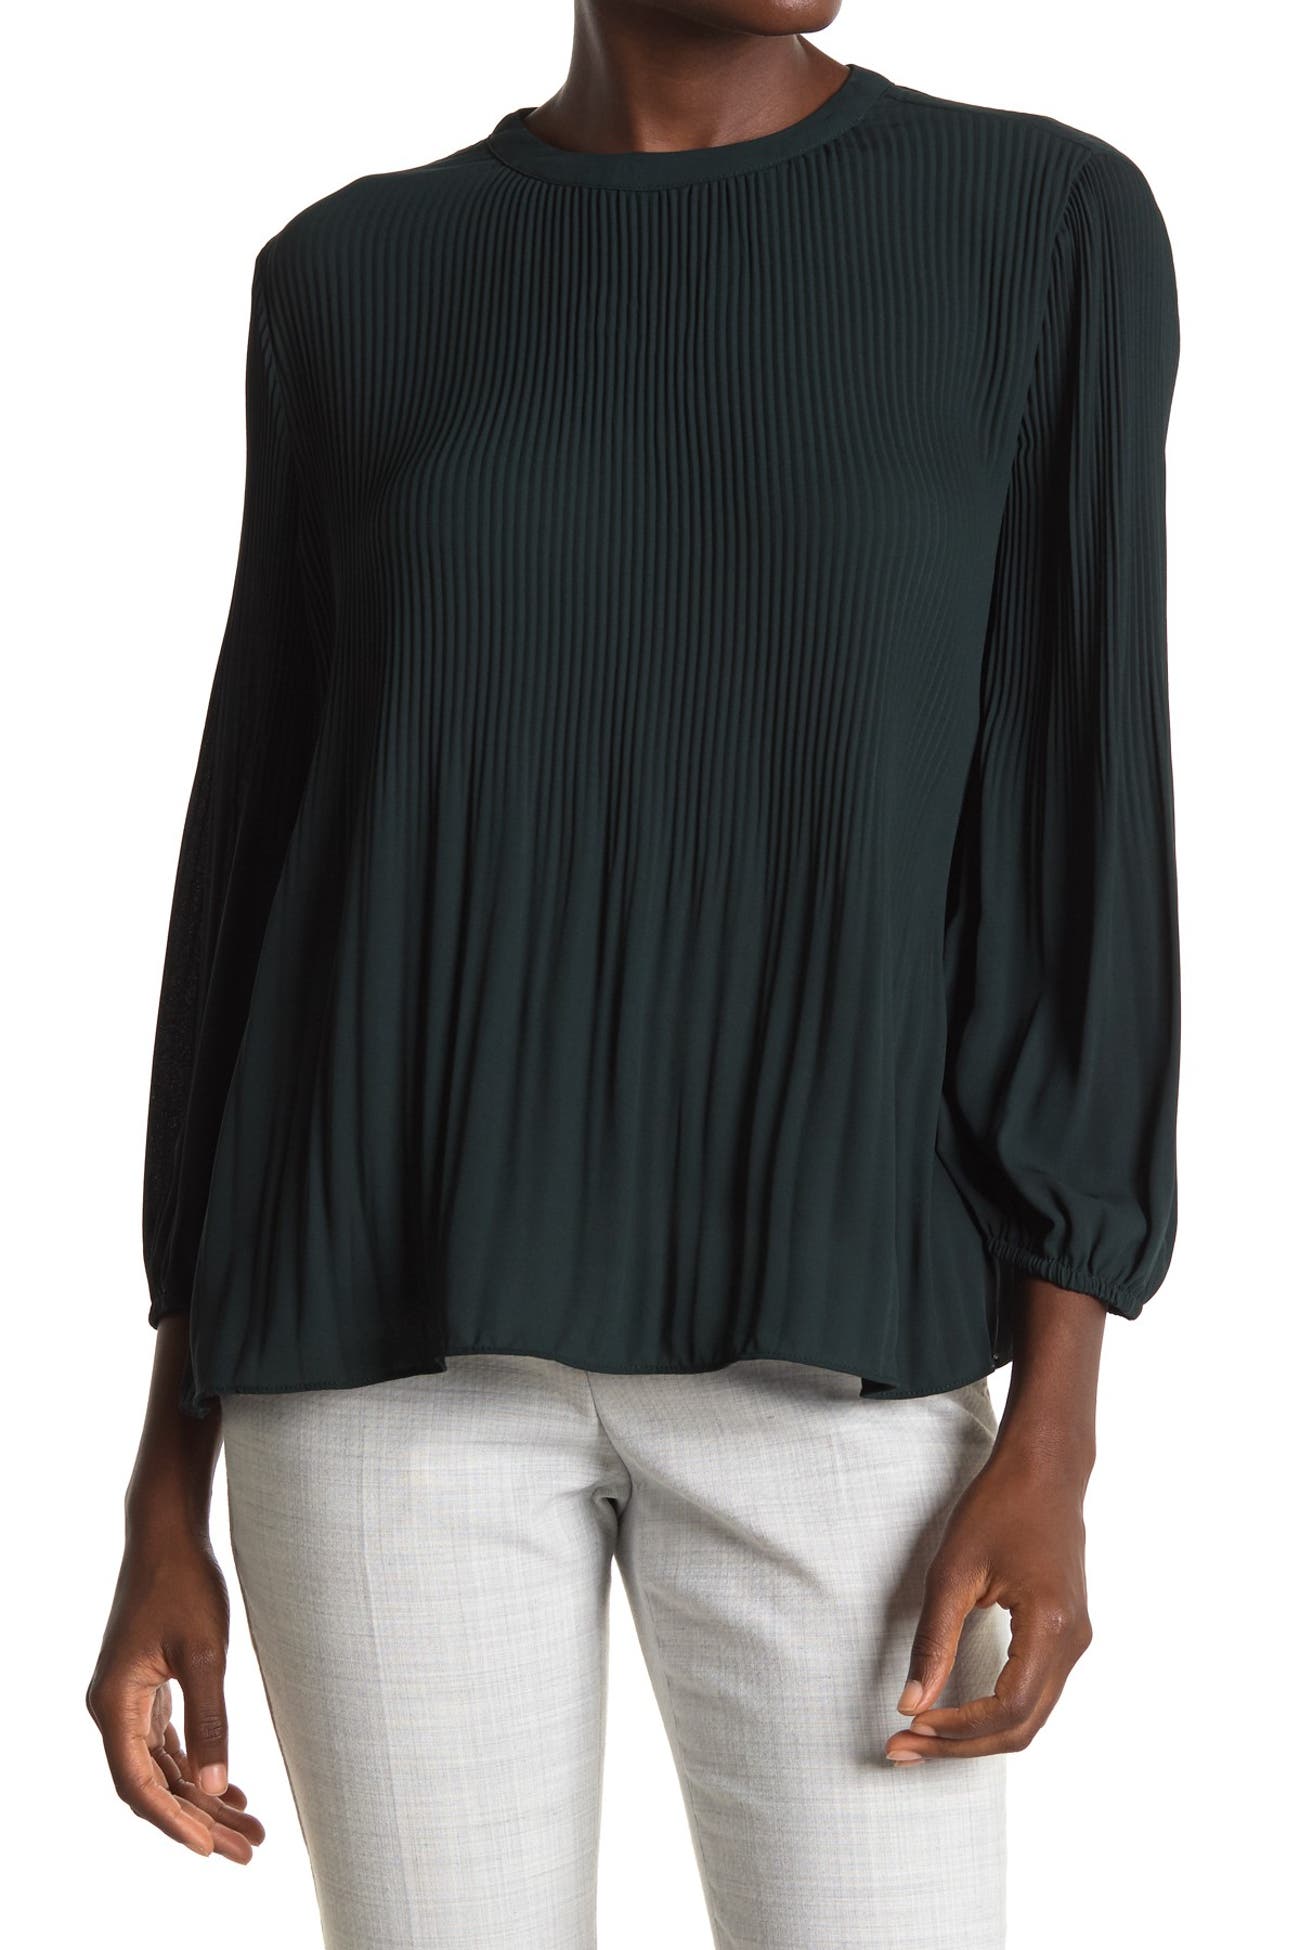 Adrianna Papell | Pleated Georgette Crepe Blouse | Nordstrom Rack